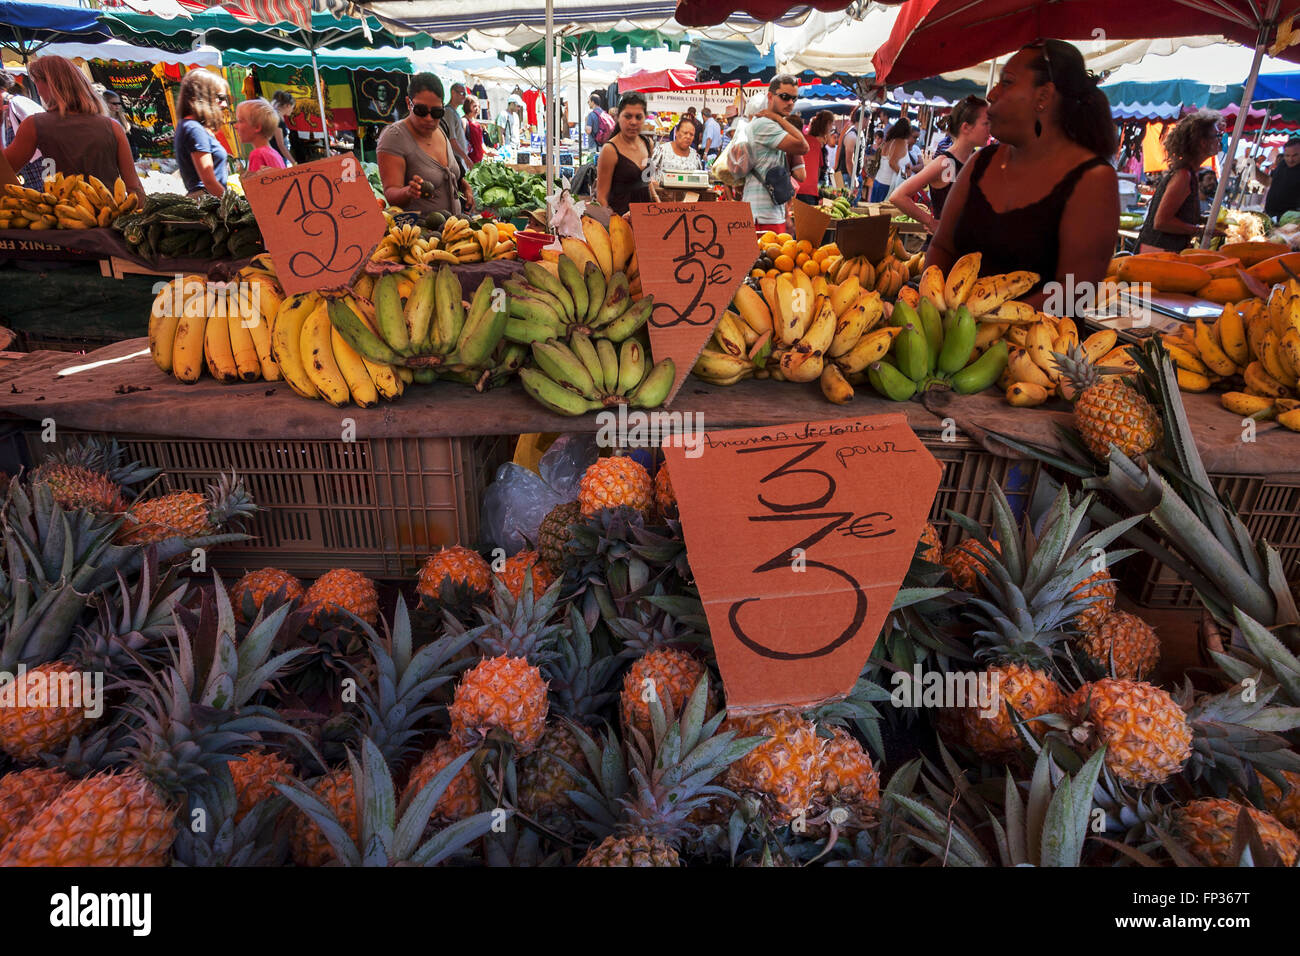 Vegetables and fruit for sale, market stalls, bananas and pineapples, weekly market, Saint Paul, Reunion Stock Photo